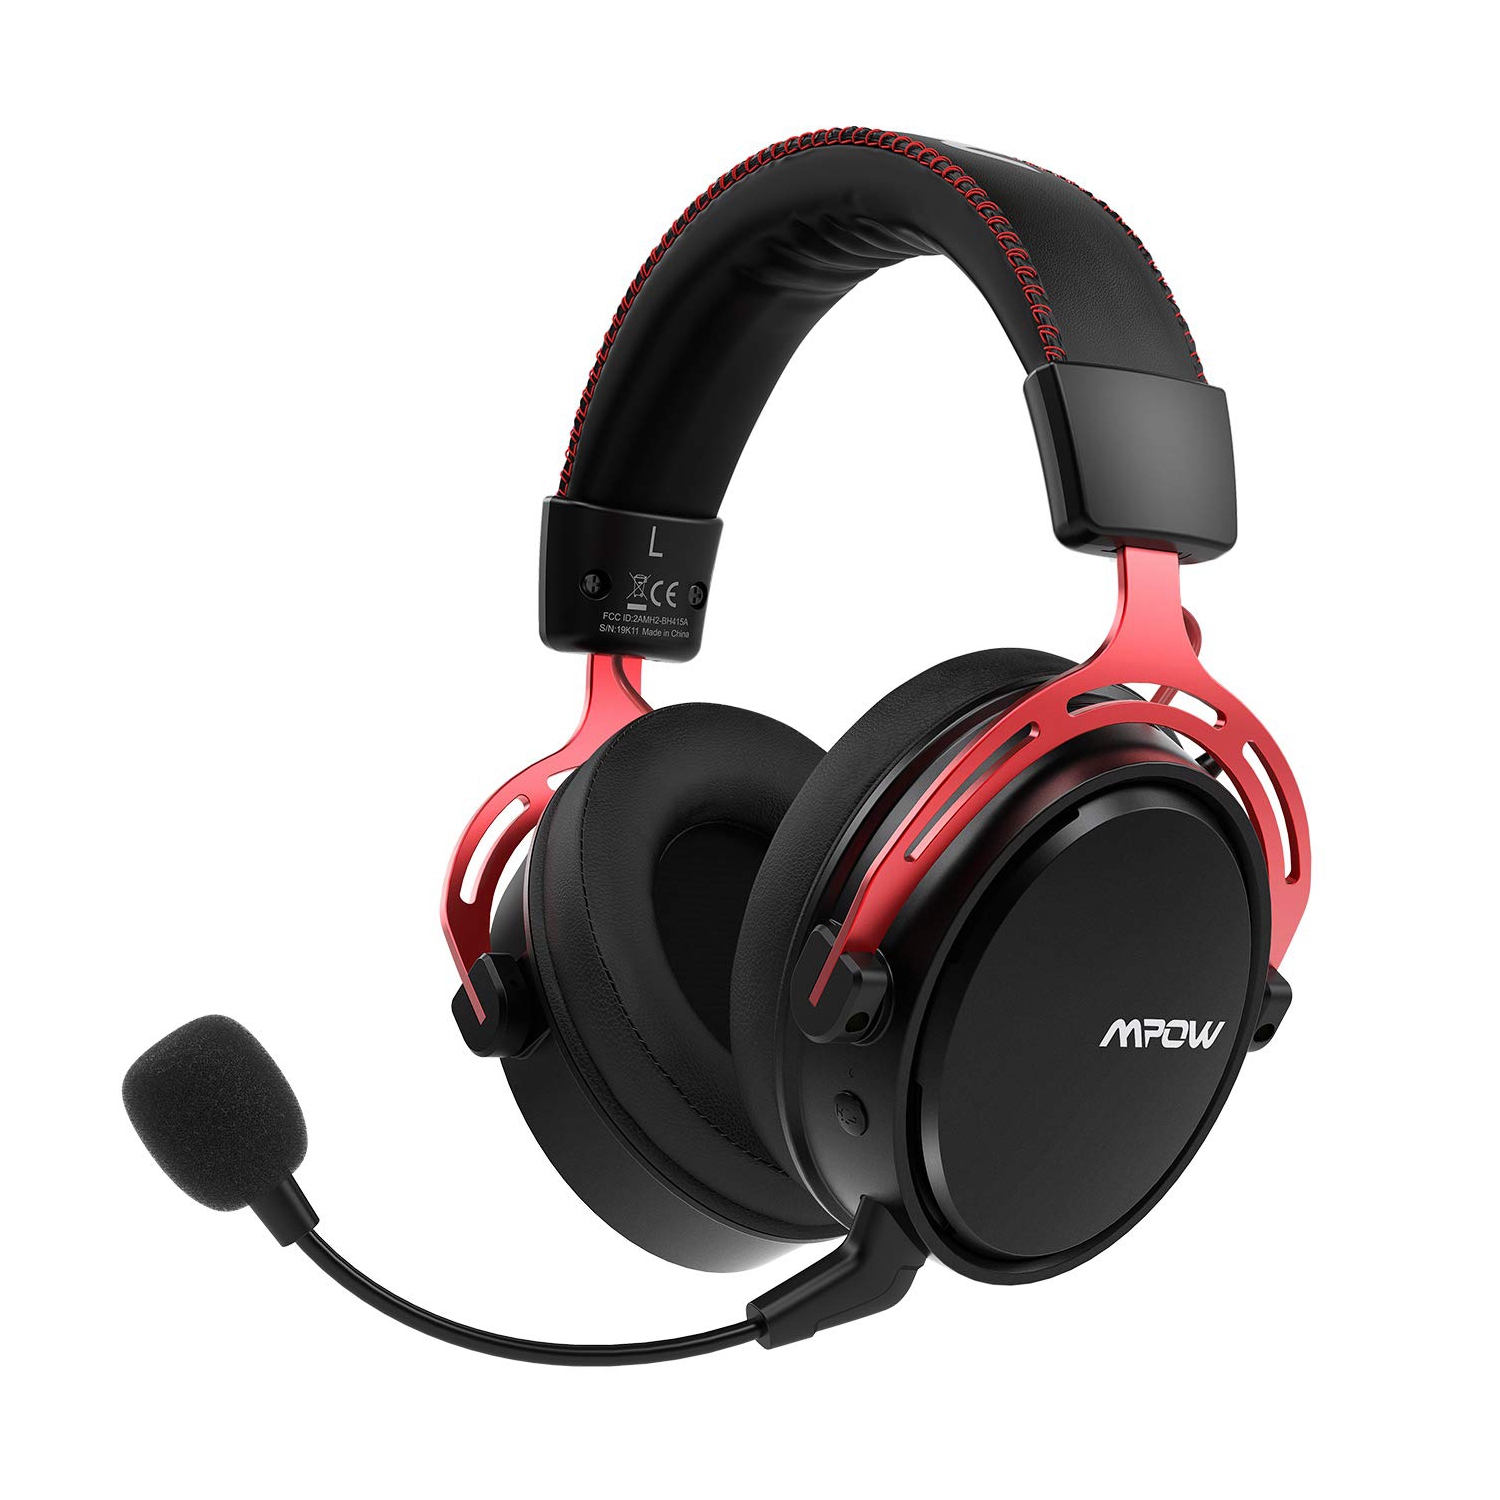 Mpow 2.4G Wireless Gaming Headset for PS4/PC Computer Headset with Dual Chamber Driver,17-hour of Wireless Use